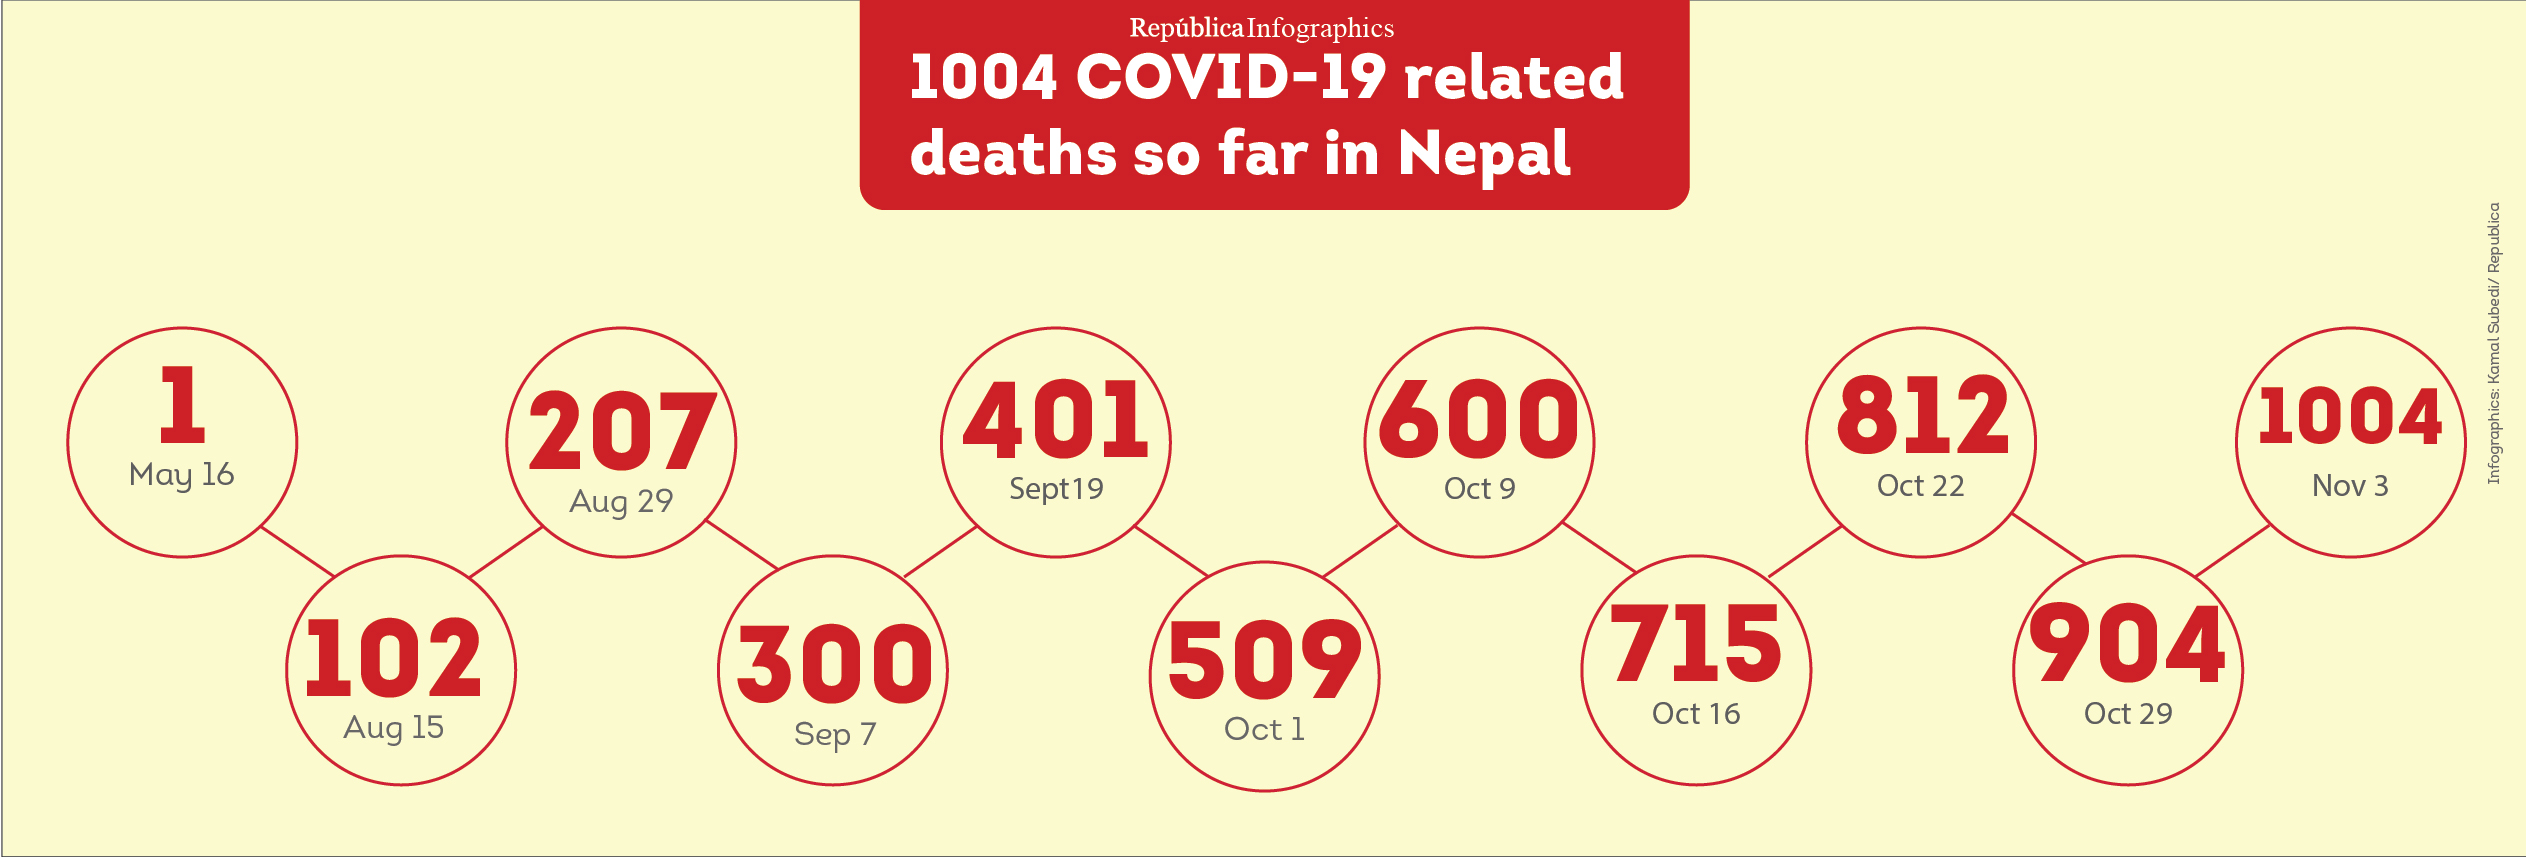 COVID-19 death tally in Nepal goes past 1000 mark as country confirms 3,114 cases on Tuesday